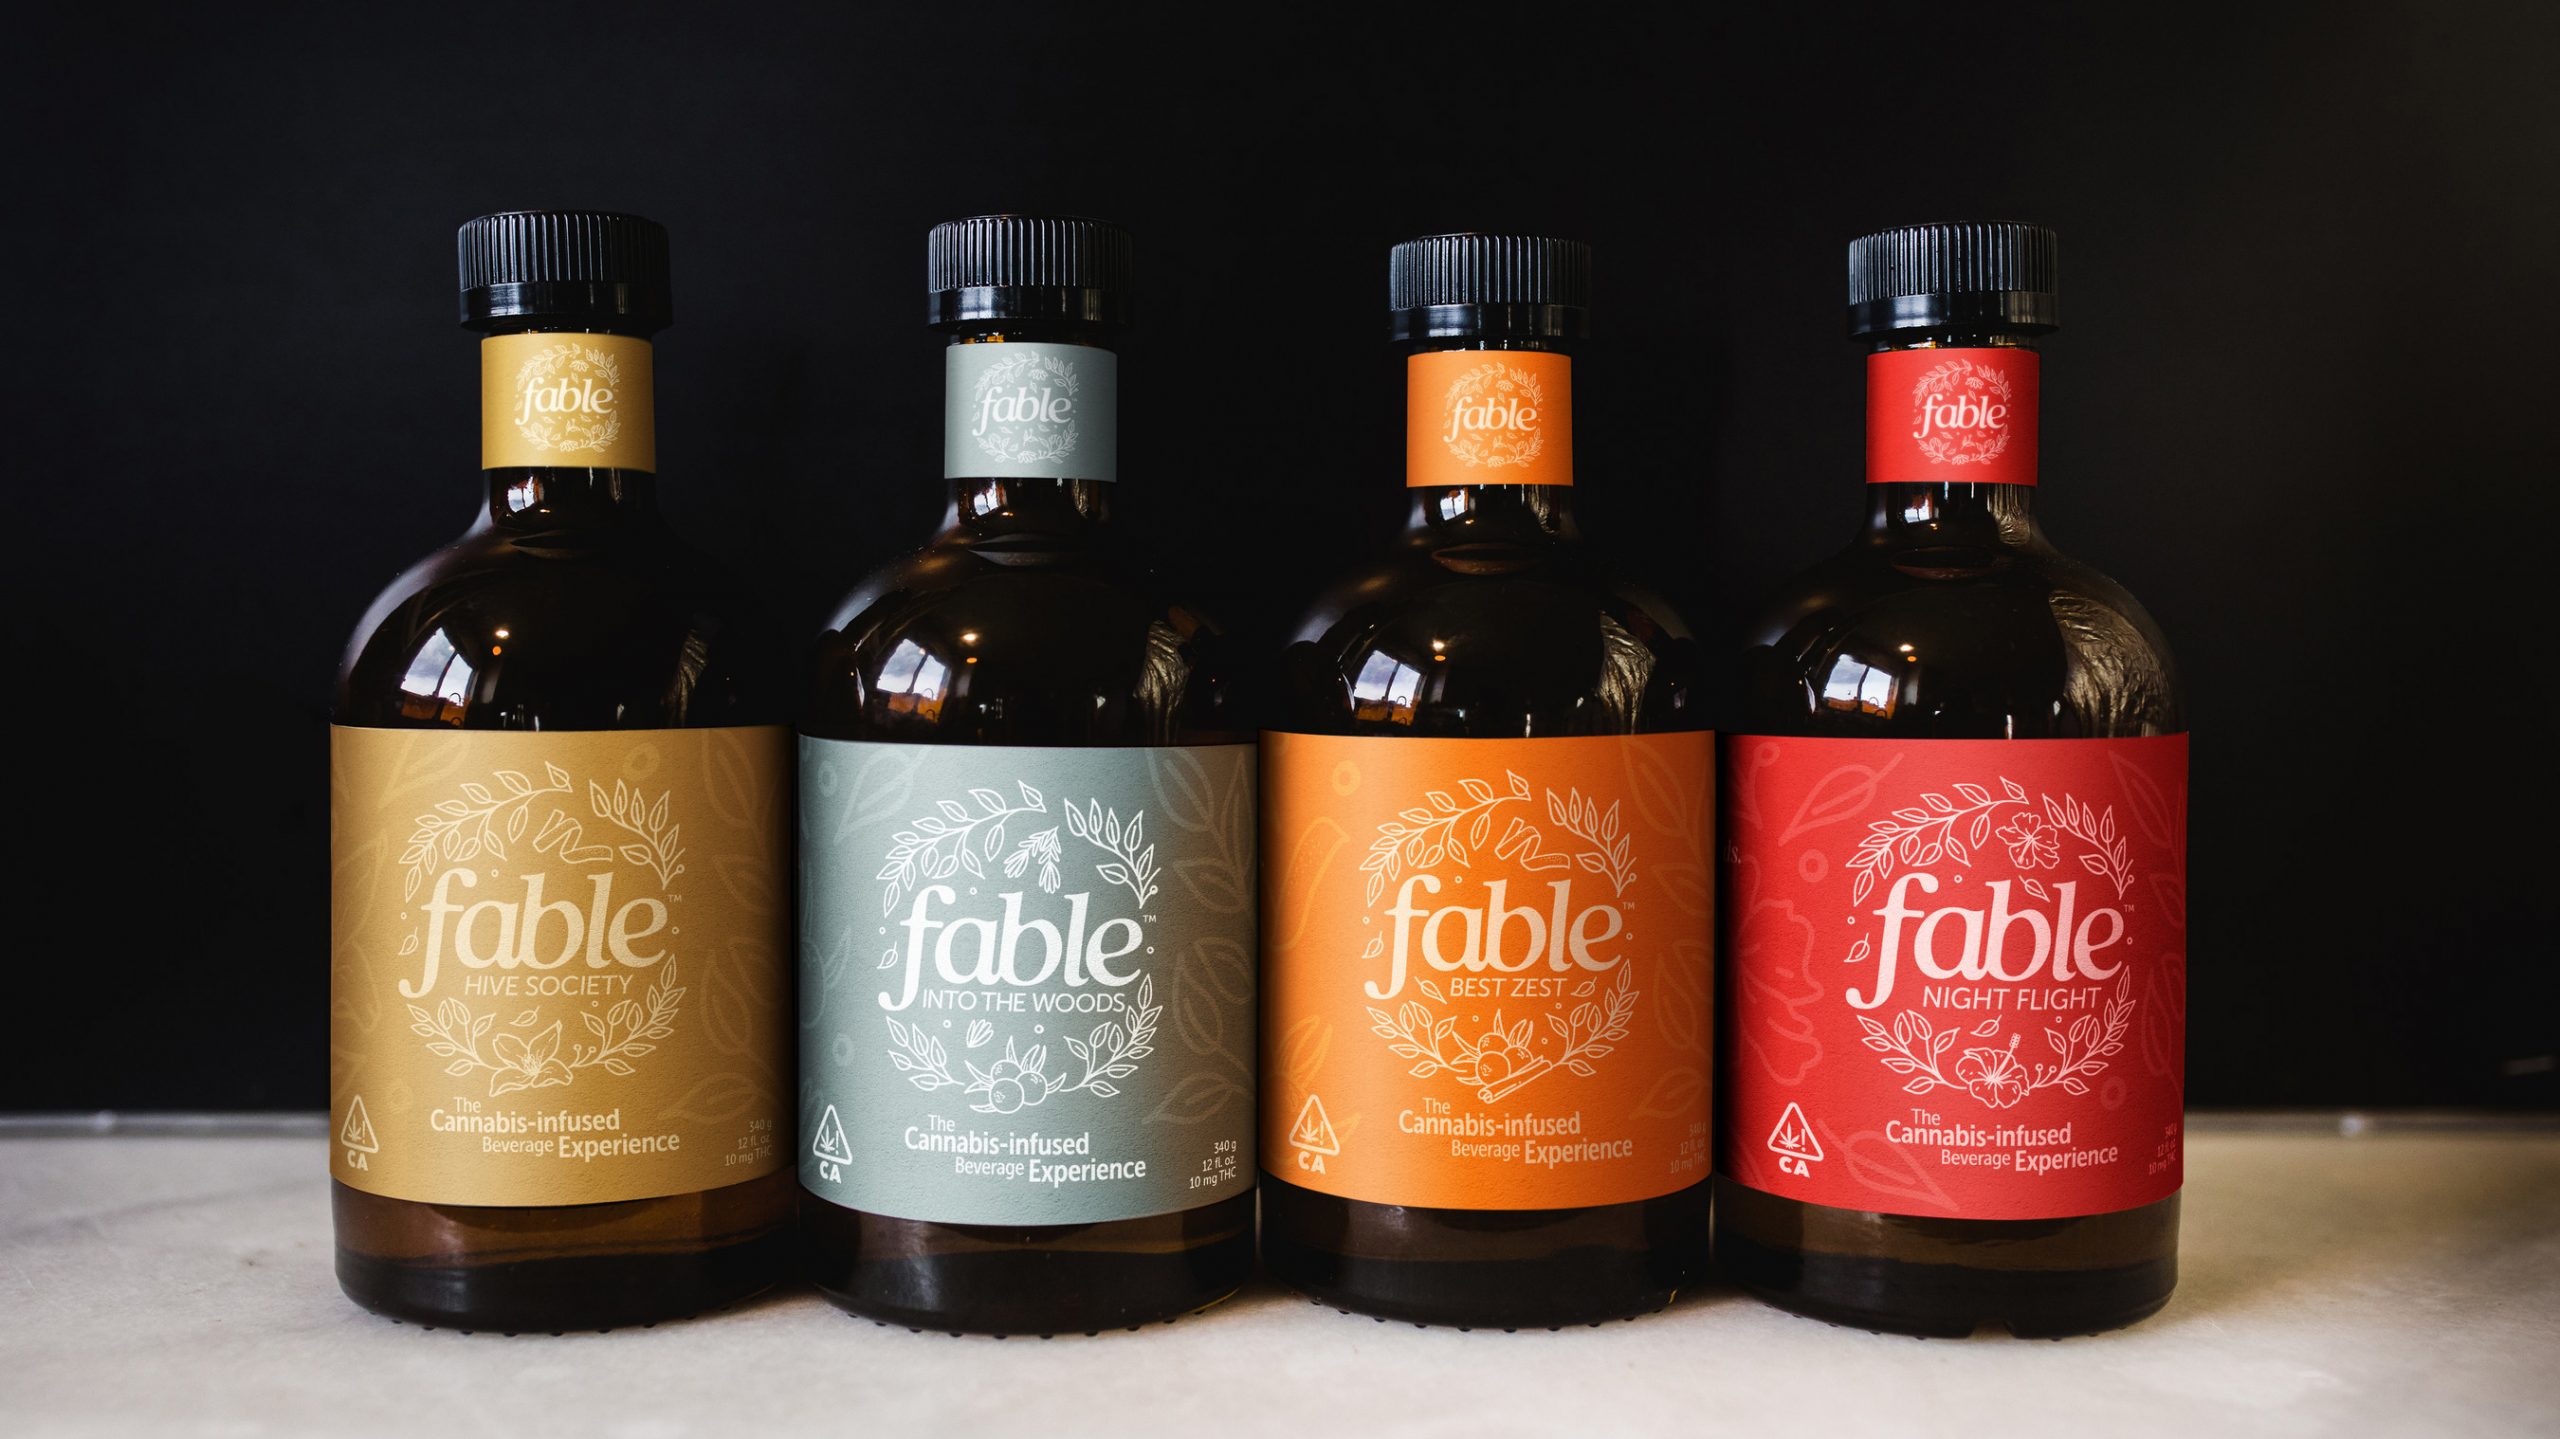 Fable Cannabis Cocktails